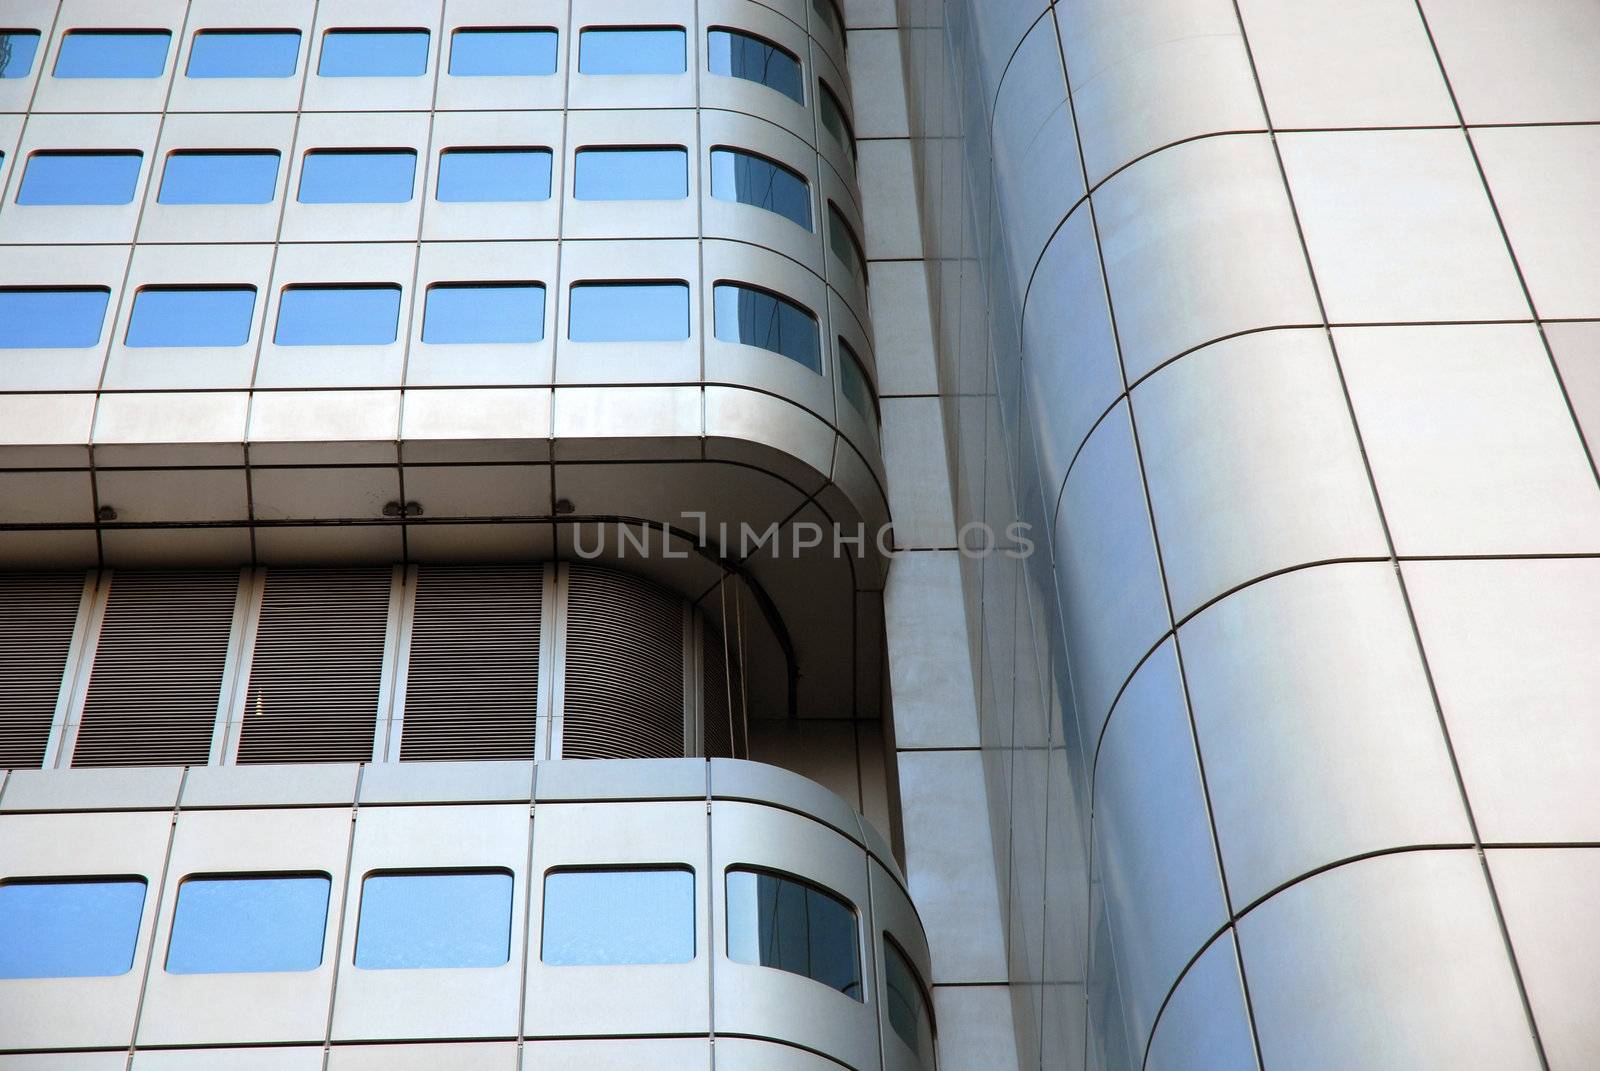 Contemporary curved skyscraper detail by cienpies